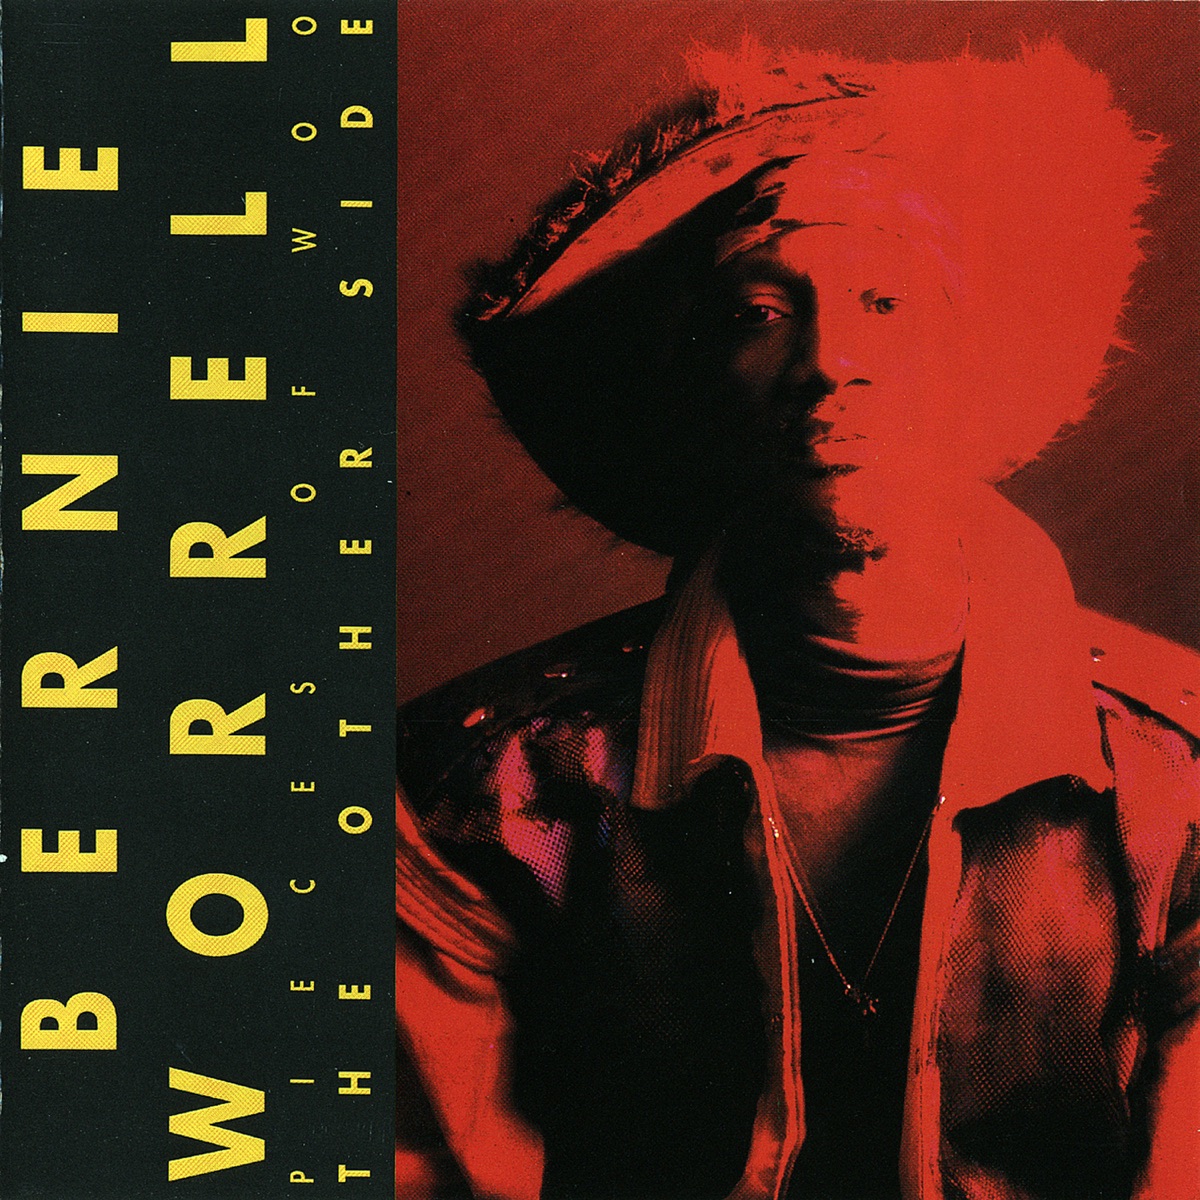 All the Woo in the World - Album by Bernie Worrell - Apple Music